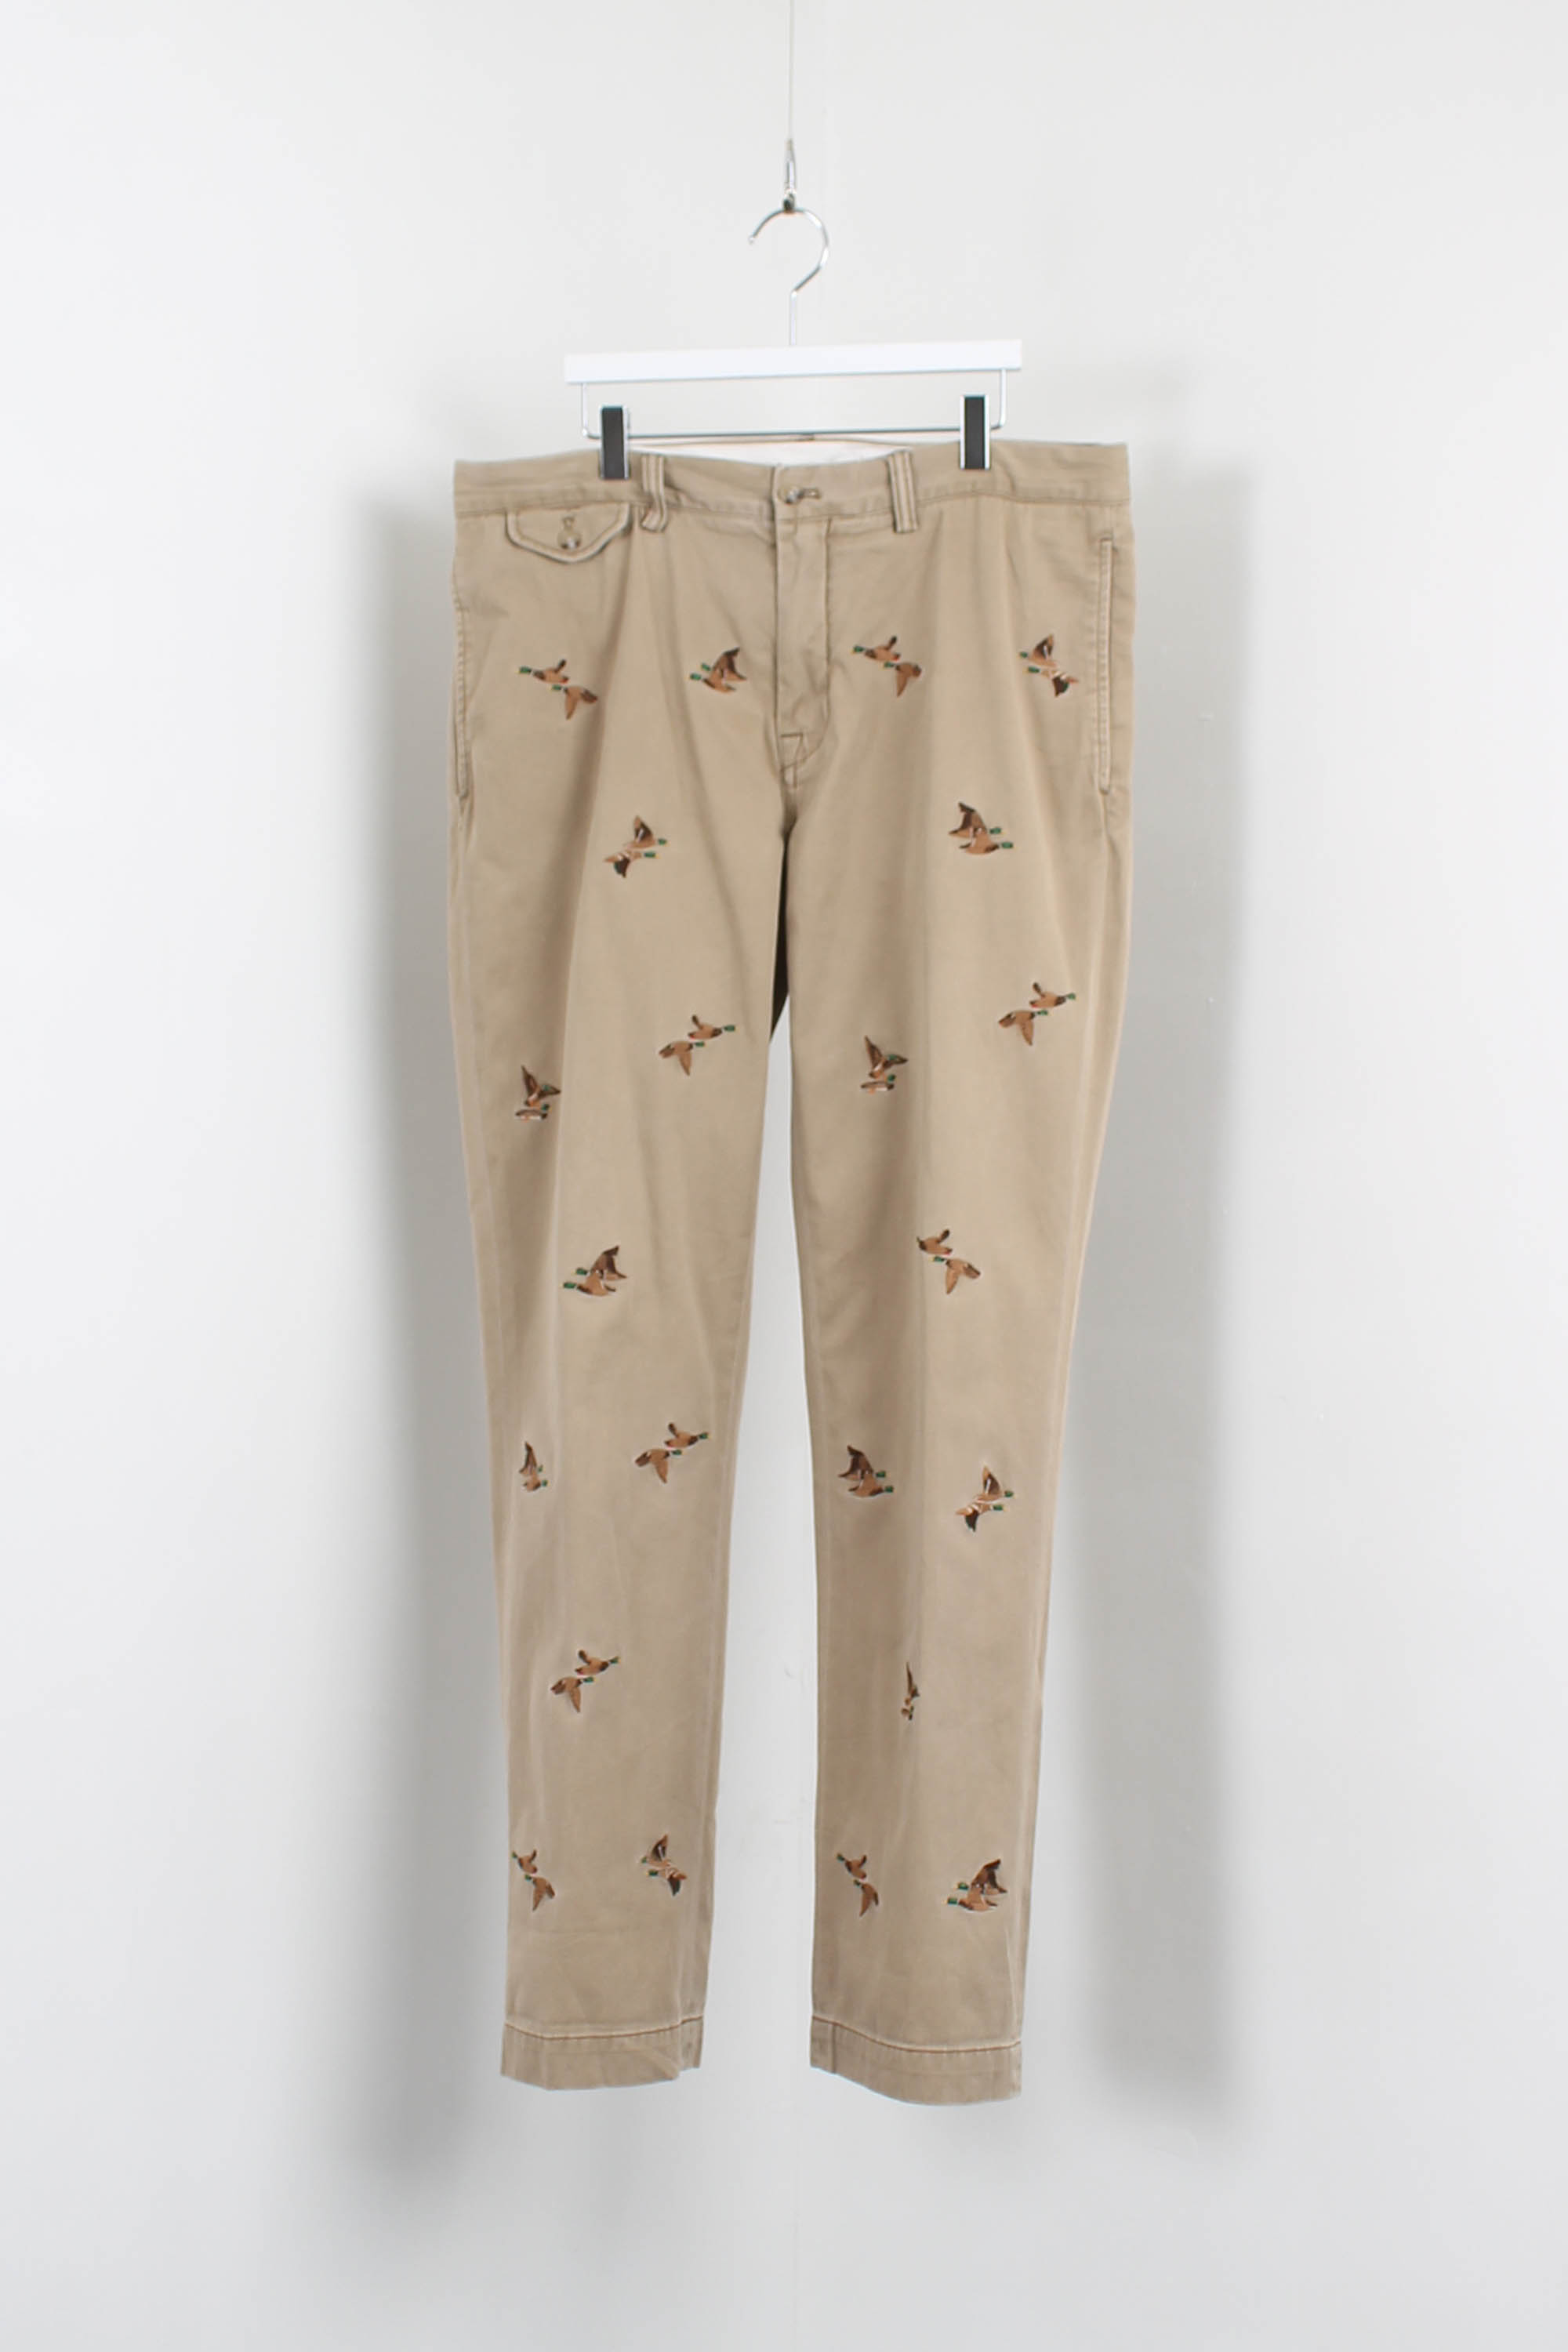 polo ralph lauren embroidered pants